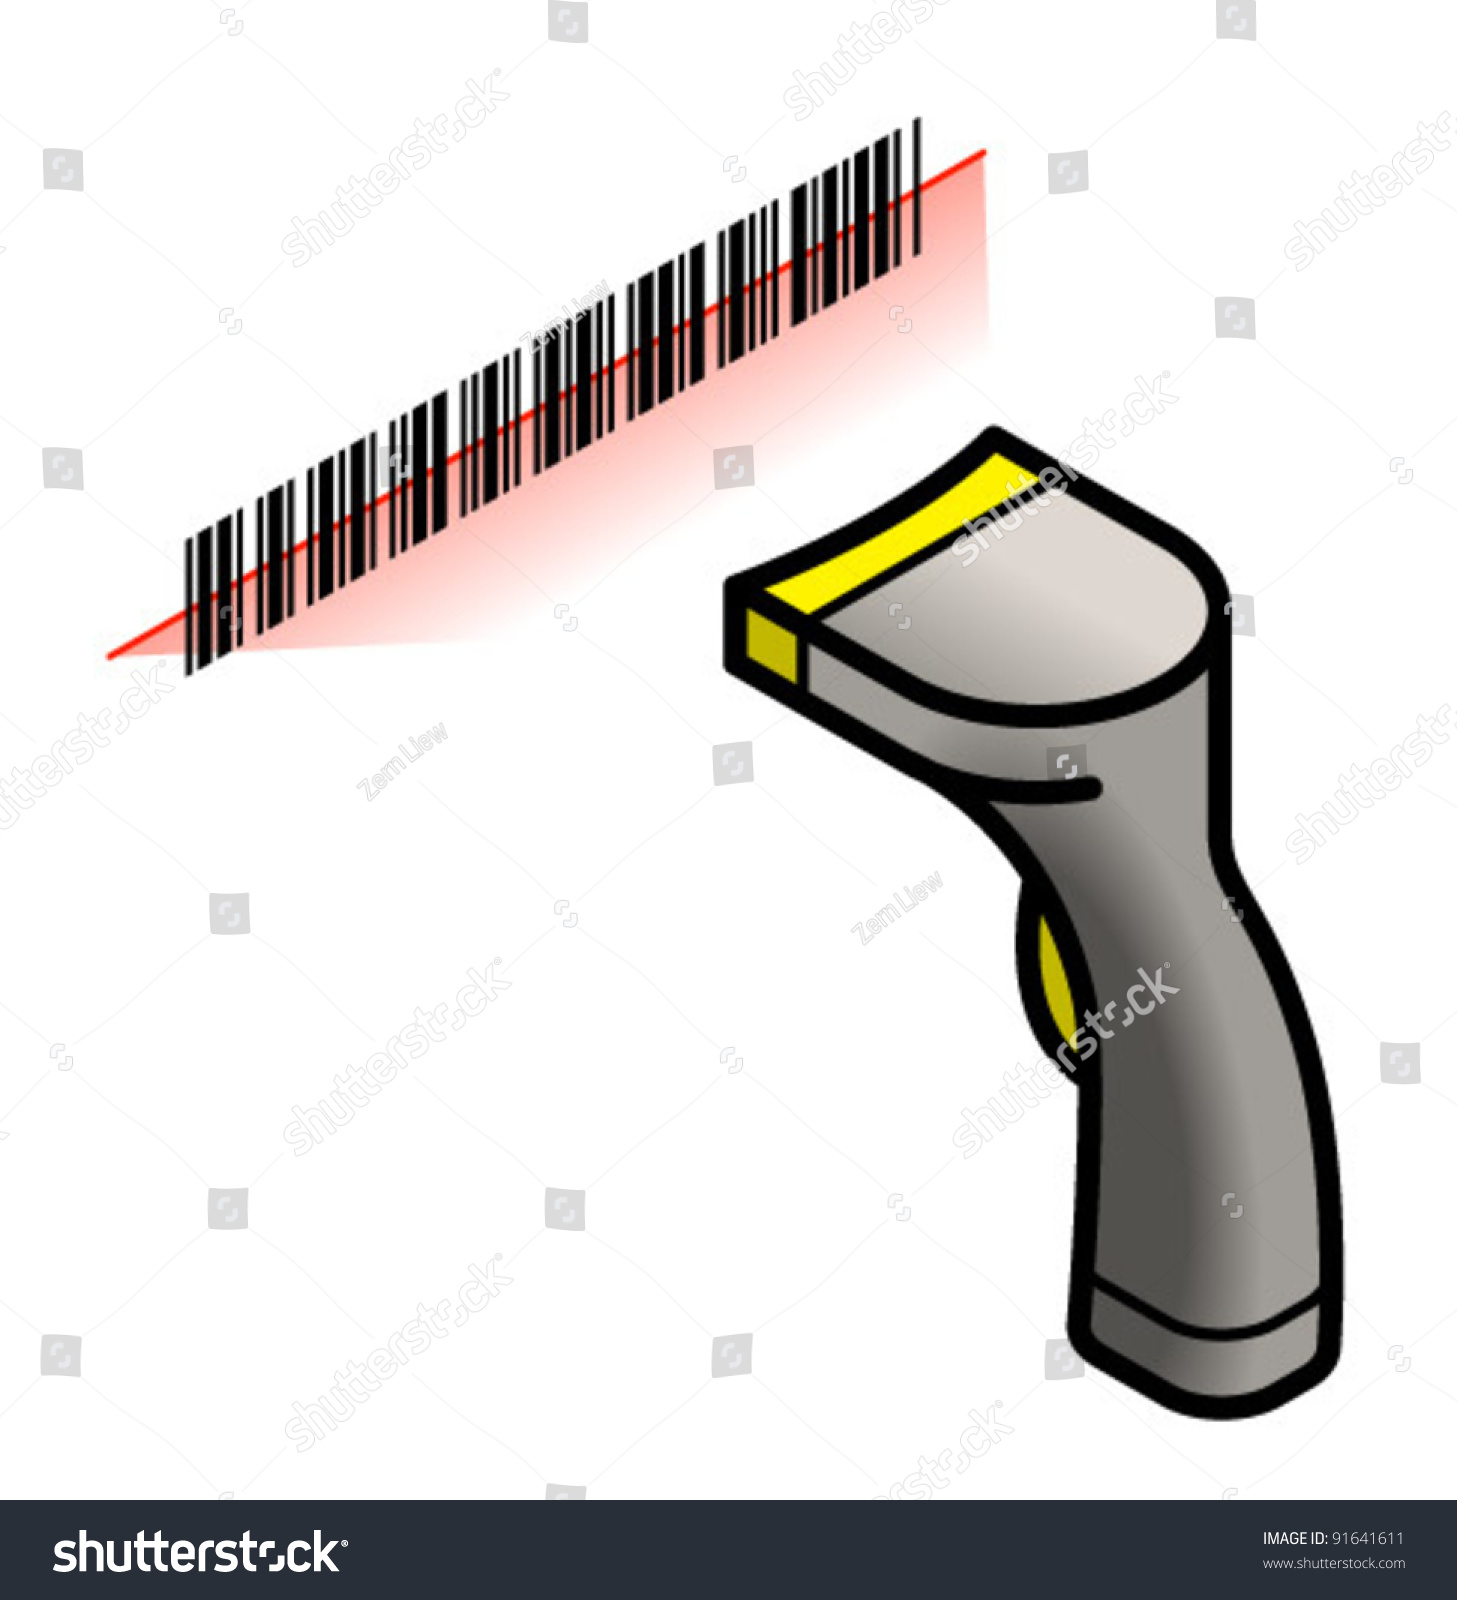 barcode scanner clipart free - photo #16